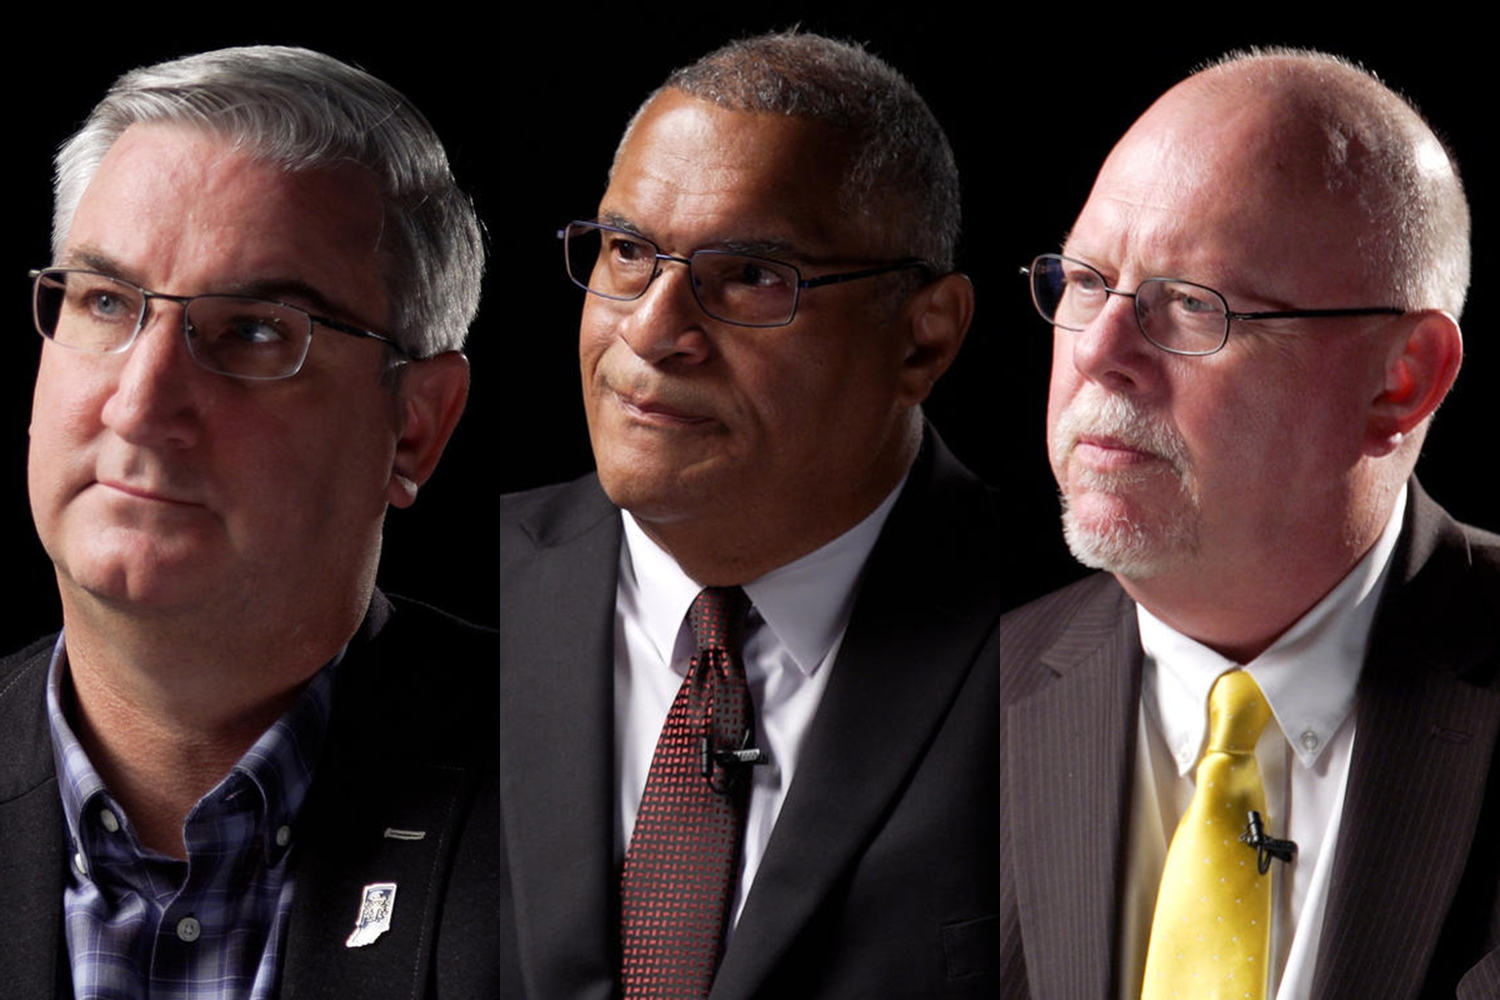 (L-R) Gov. Eric Holcomb (R), Dr. Woody Myers (D) and Donald Rainwater (L).